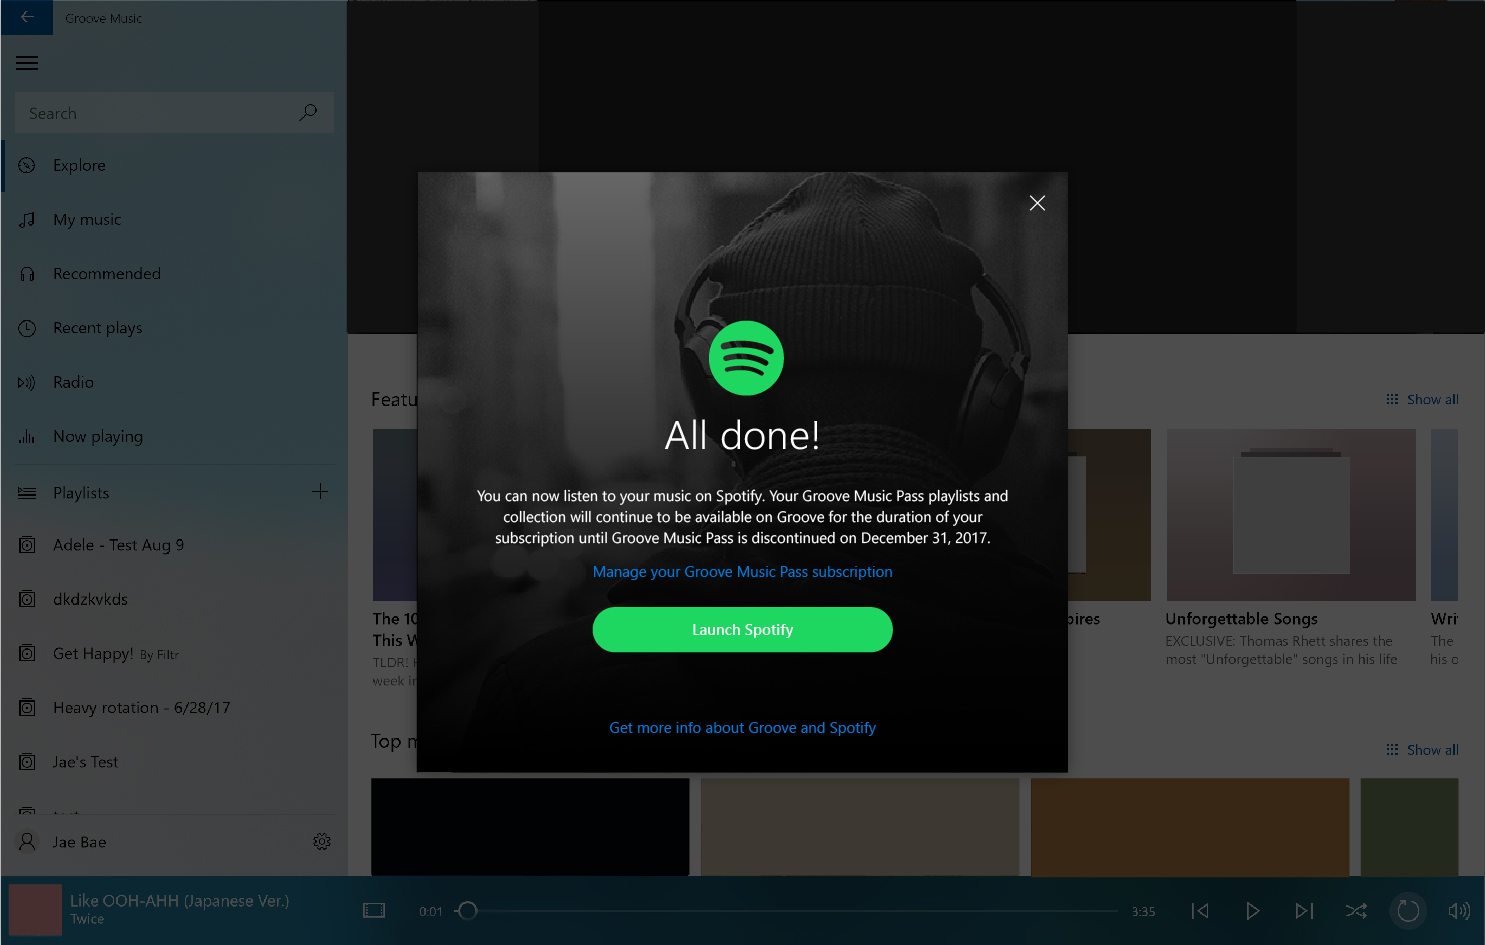 Confirmation of music being moved to Spotify from Groove.